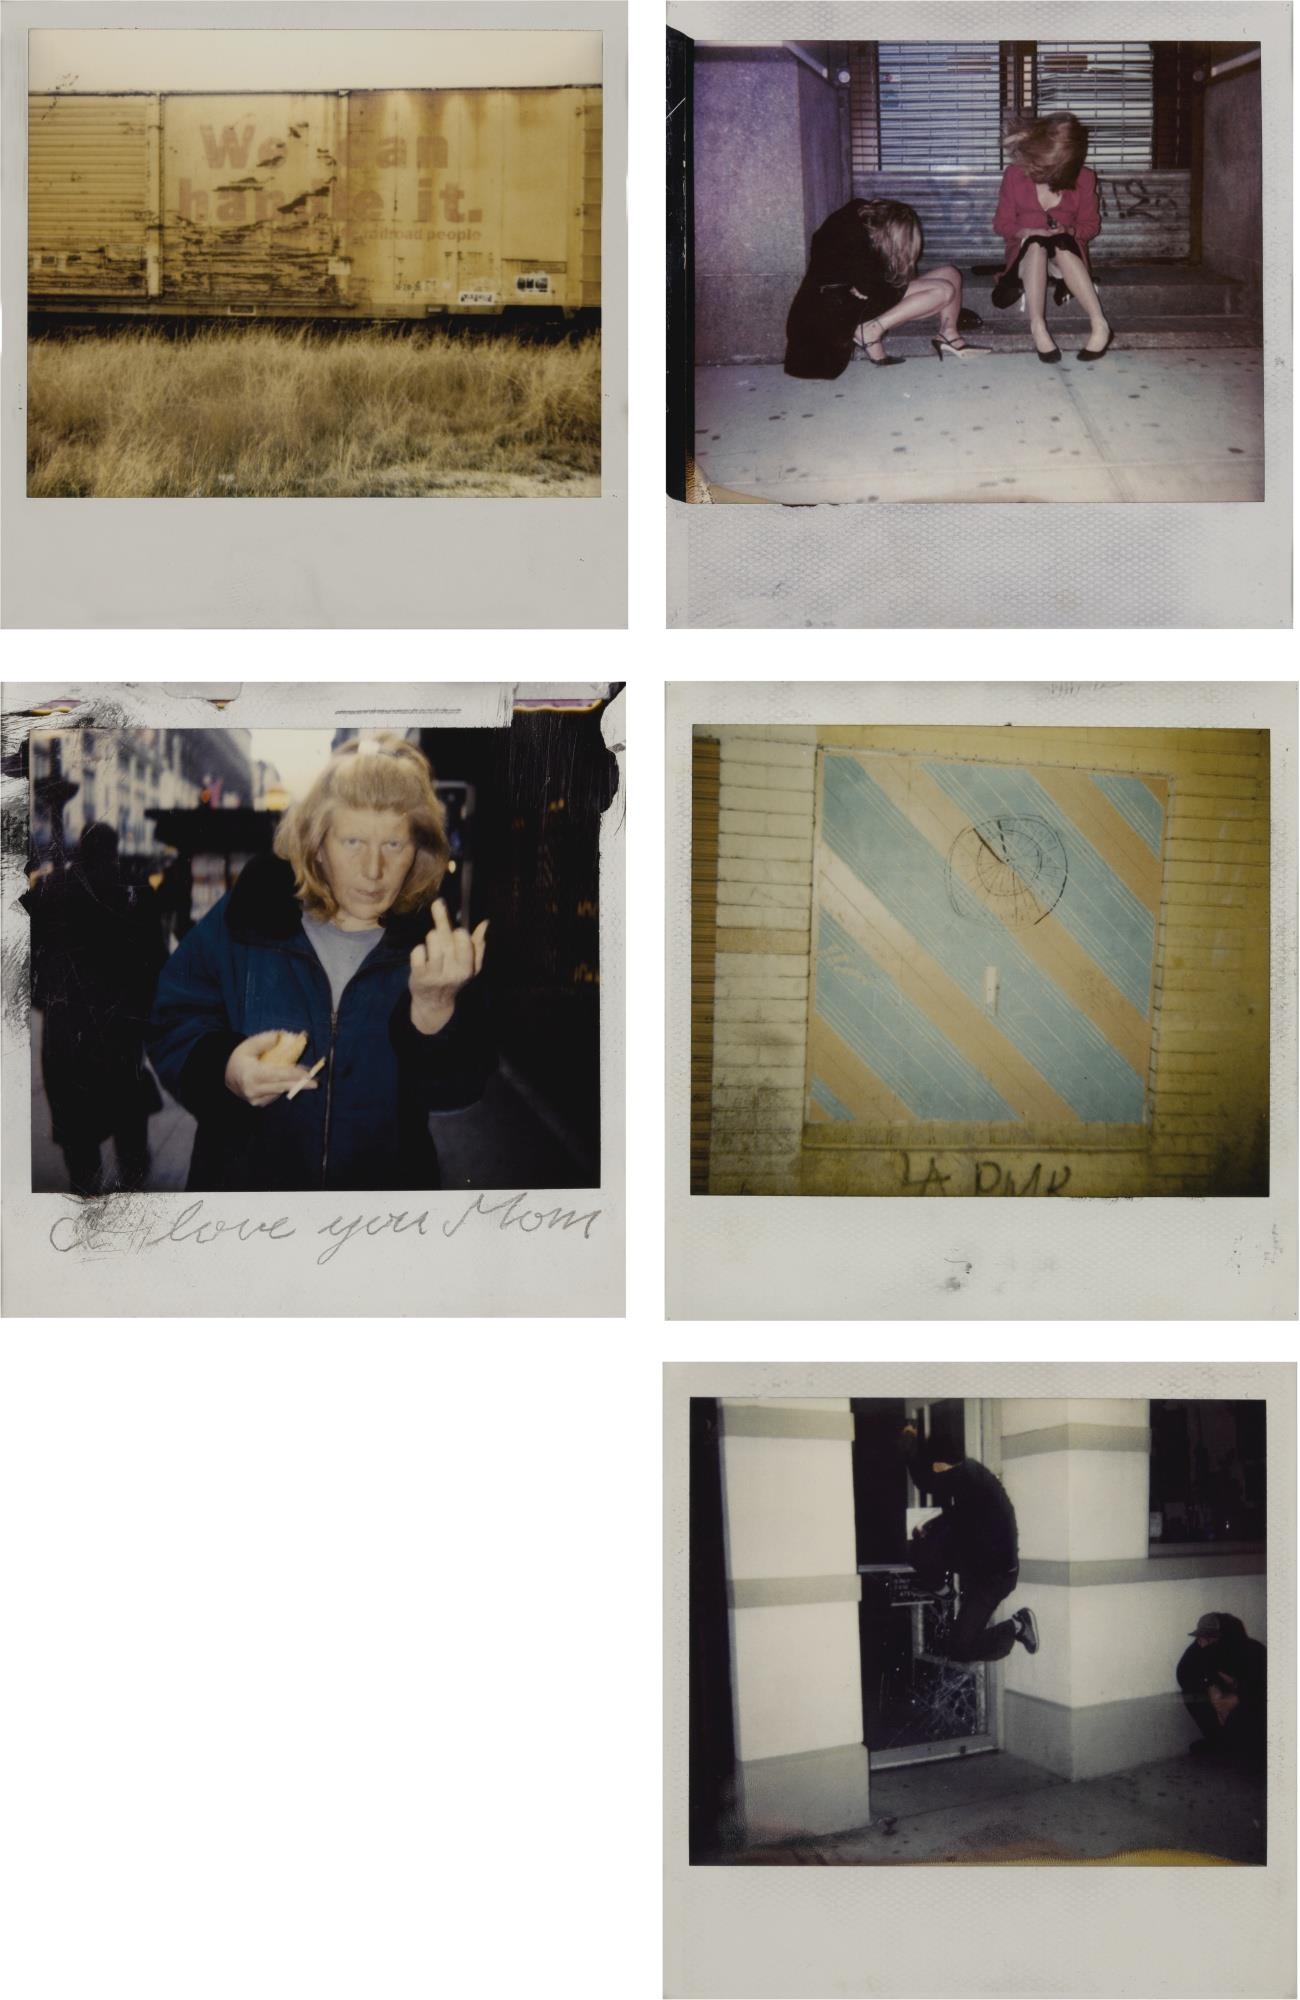 Dash Snow | 5 Works: Selected Images (Polaroid Enlargements